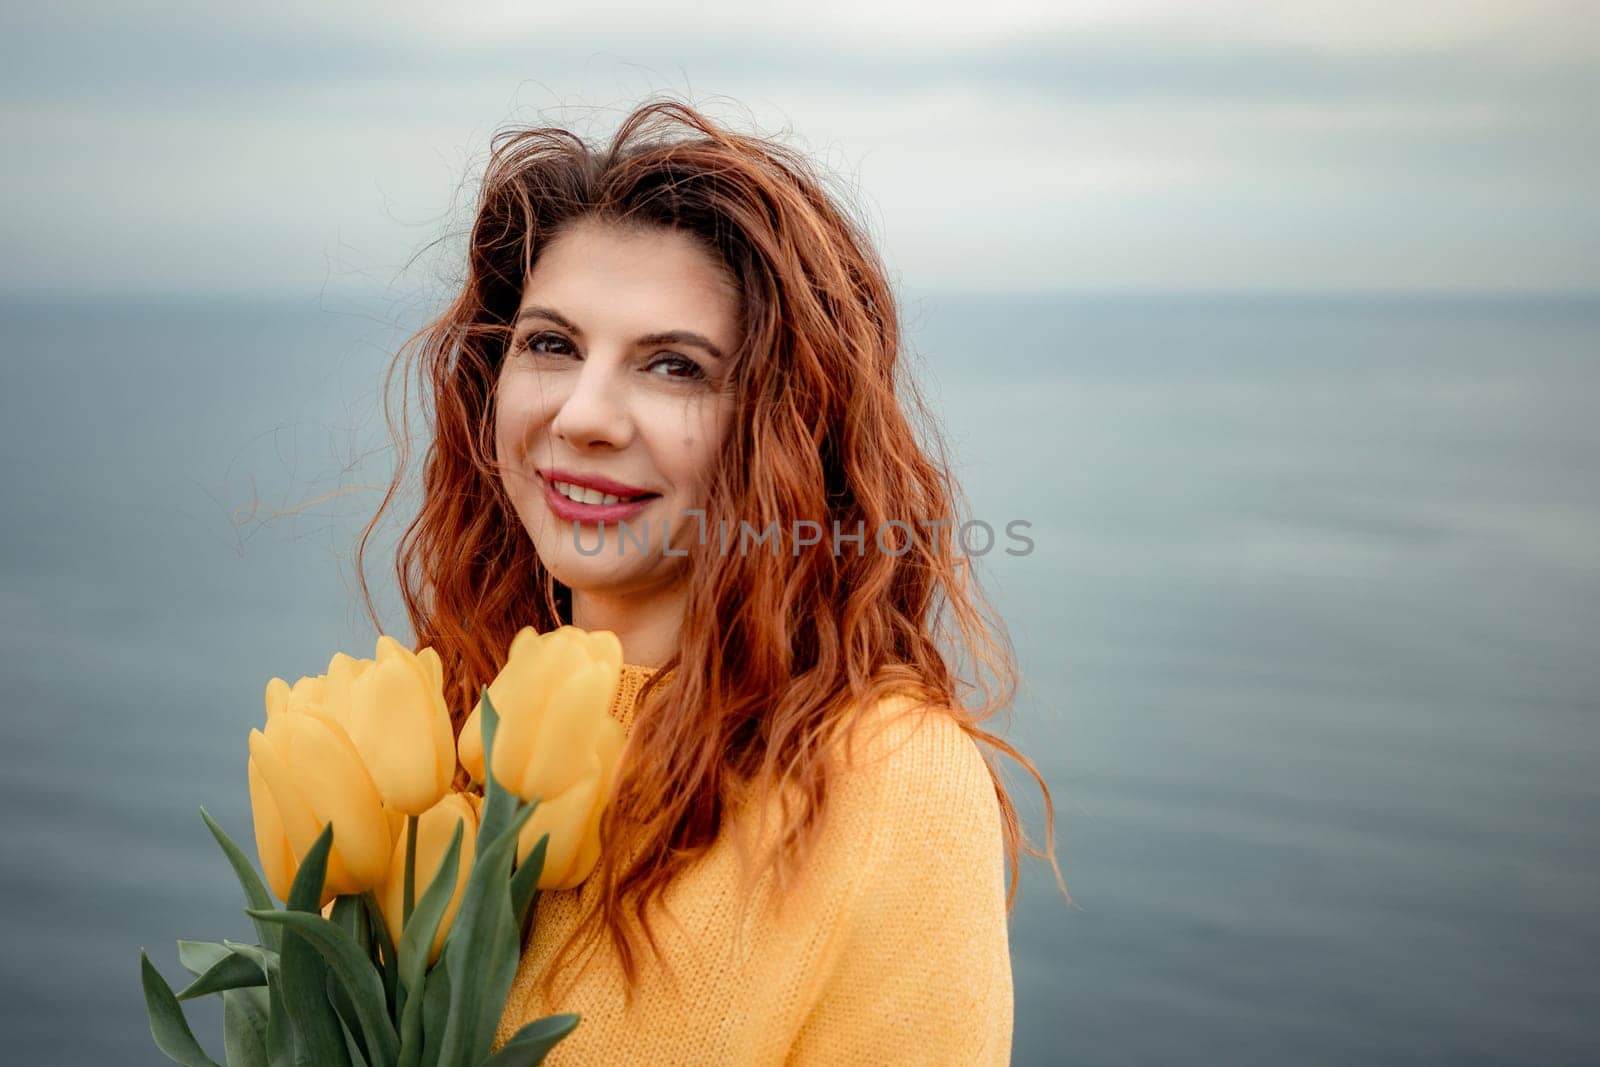 Portrait of a happy woman with hair flying in the wind against the backdrop of mountains and sea. Holding a bouquet of yellow tulips in her hands, wearing a yellow sweater.